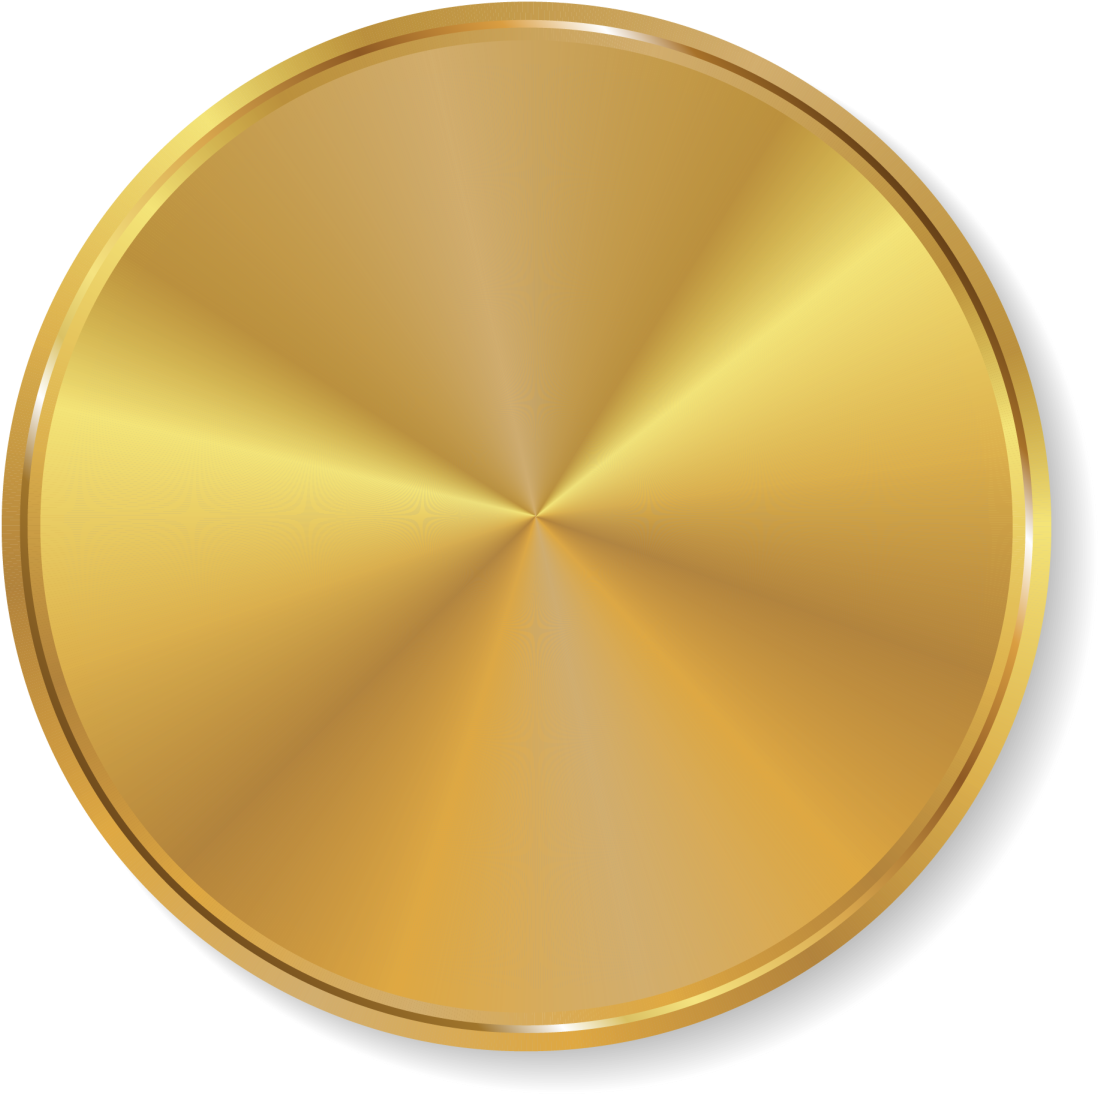 Shiny Gold Coin Graphic